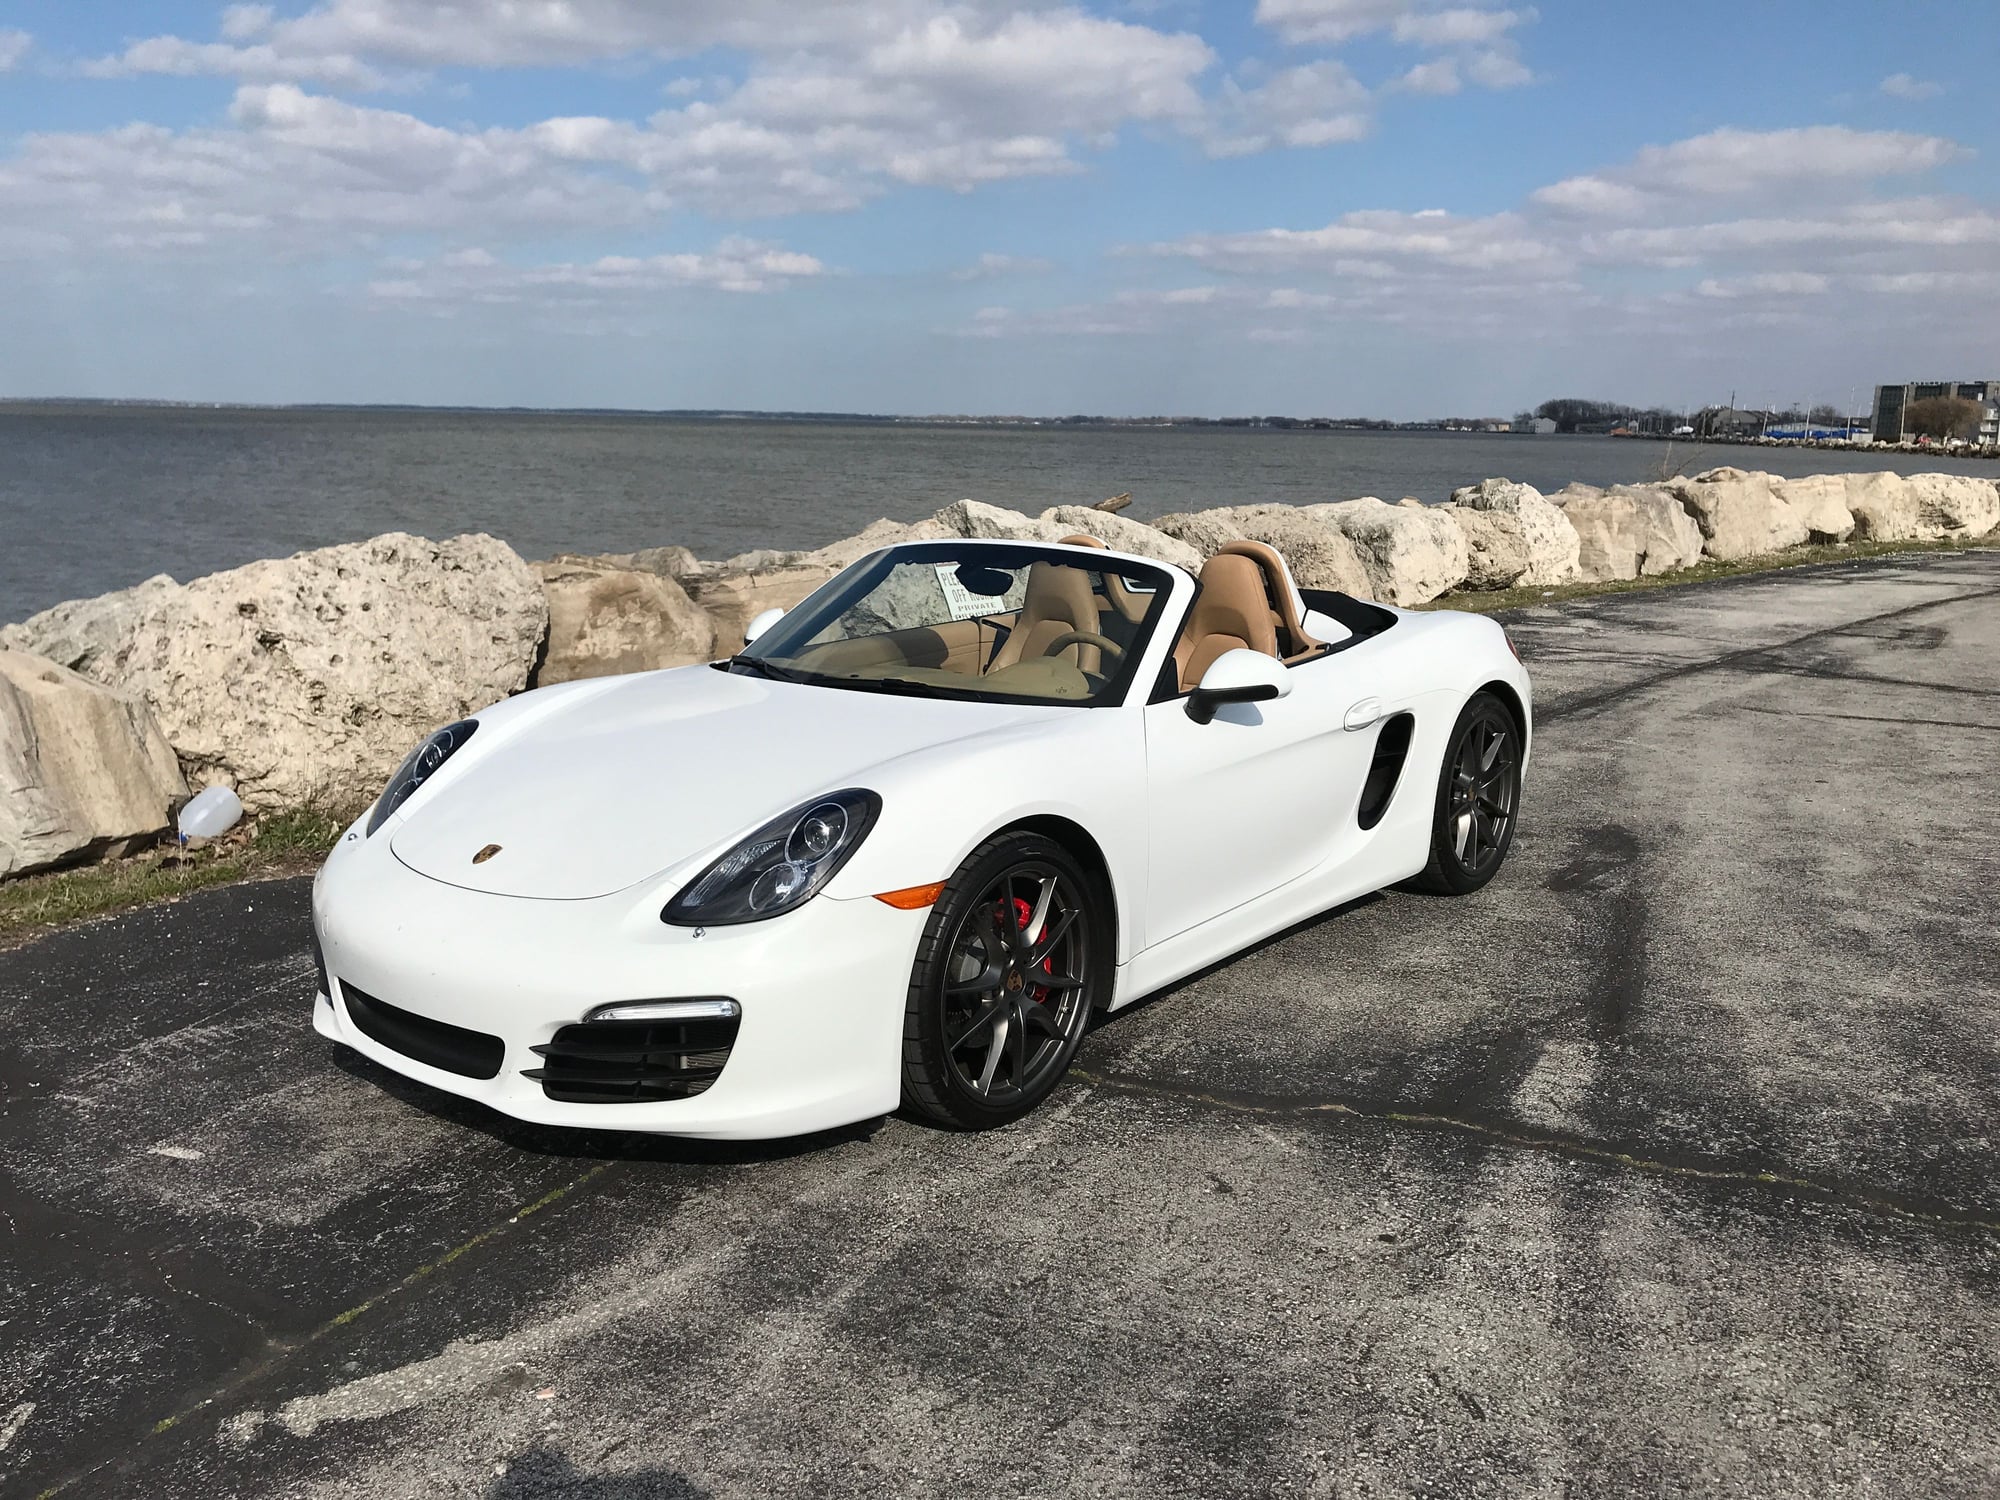 2013 Porsche Boxster - 2013 Porsche 981 Boxster S PDK white with tan interior - 3.4L - Used - VIN WP0CB2A84DS134124 - 36,851 Miles - 6 cyl - 2WD - Automatic - Convertible - White - Rocky River, OH 44116, United States